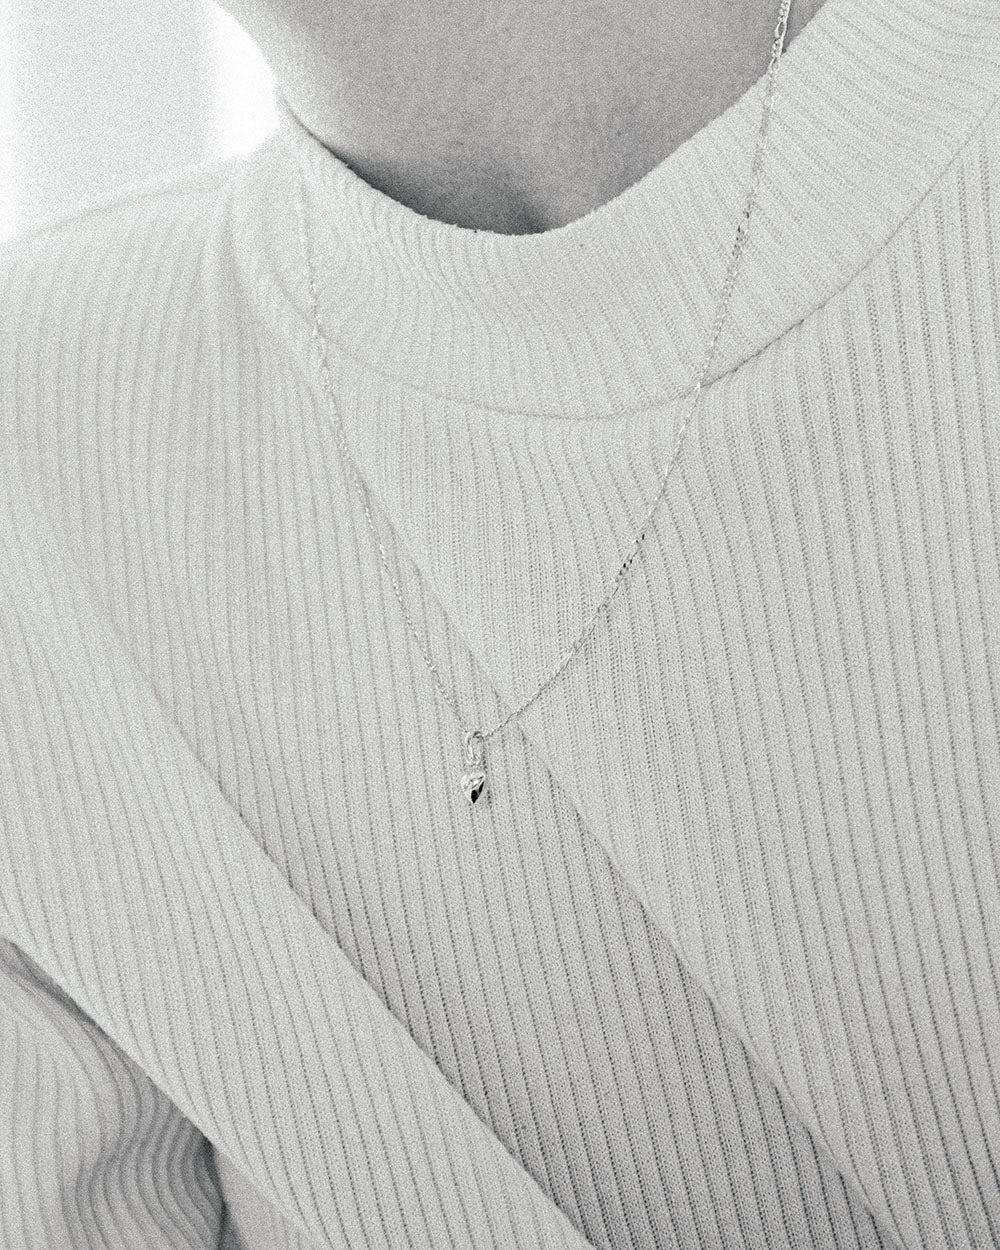 handmade in toronto canada sterling silver simple minimalist necklace